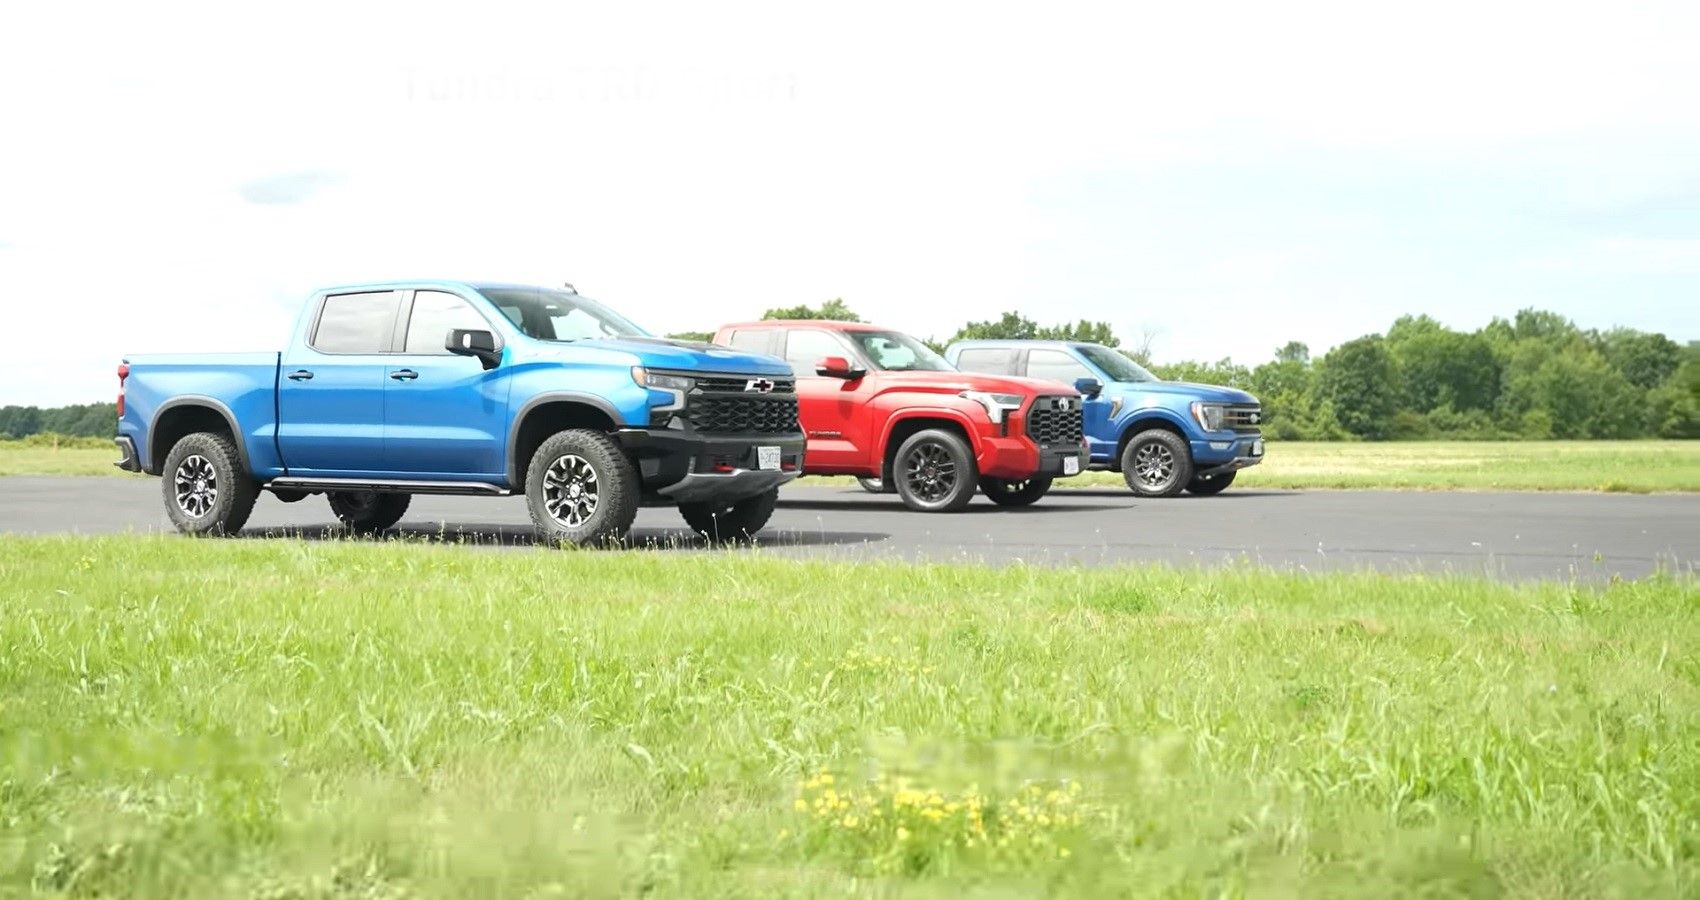 Ford F-150 Chevrolet Silverado, Toyota Tundra drag race, front quarter view of all in a line